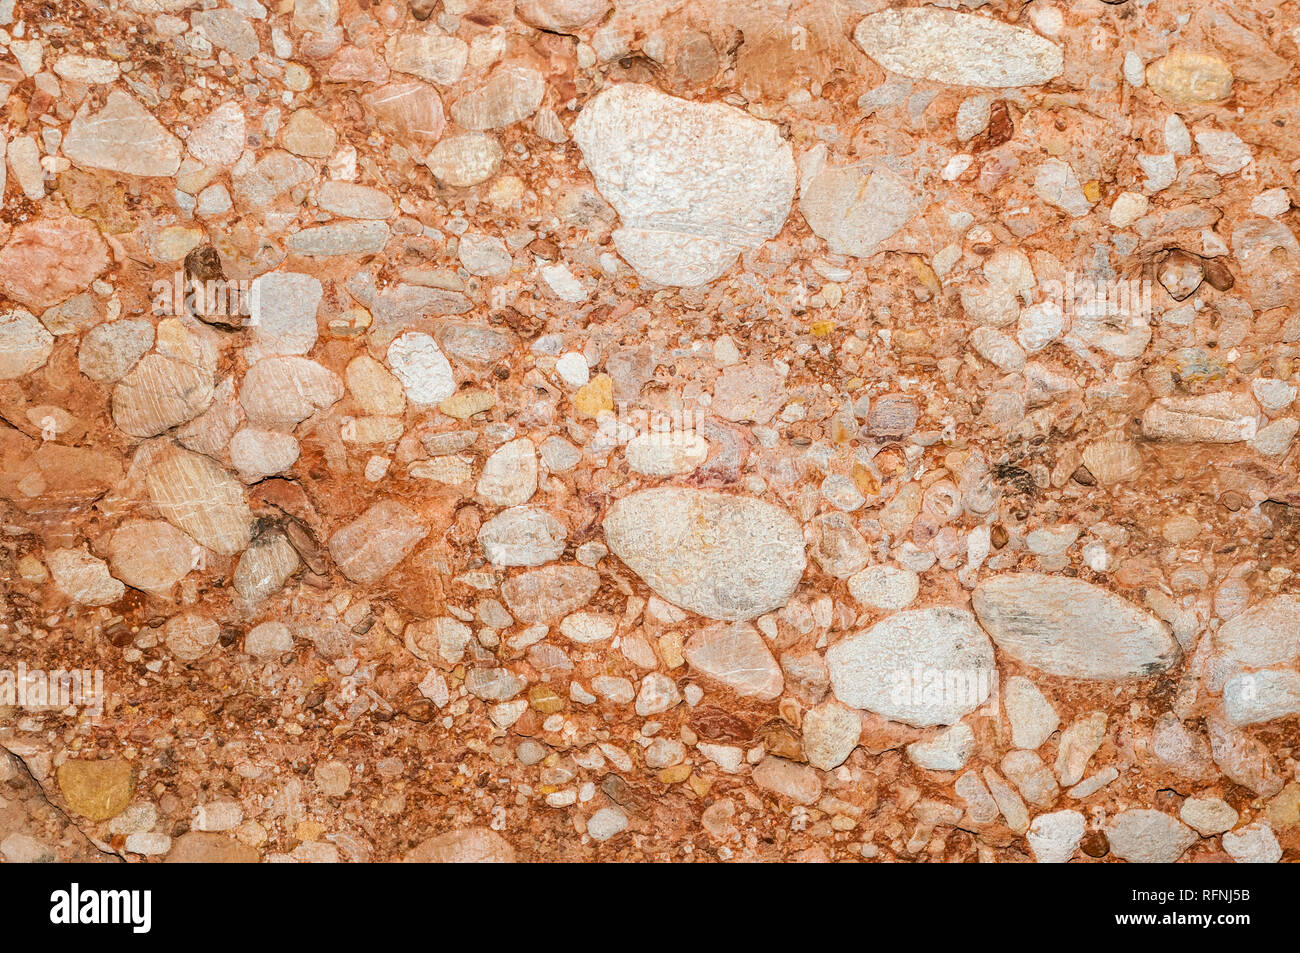 close-up view conglomerate rock inside salnitre caves in Montserrat, Collbató, Catalonia, Spain Stock Photo